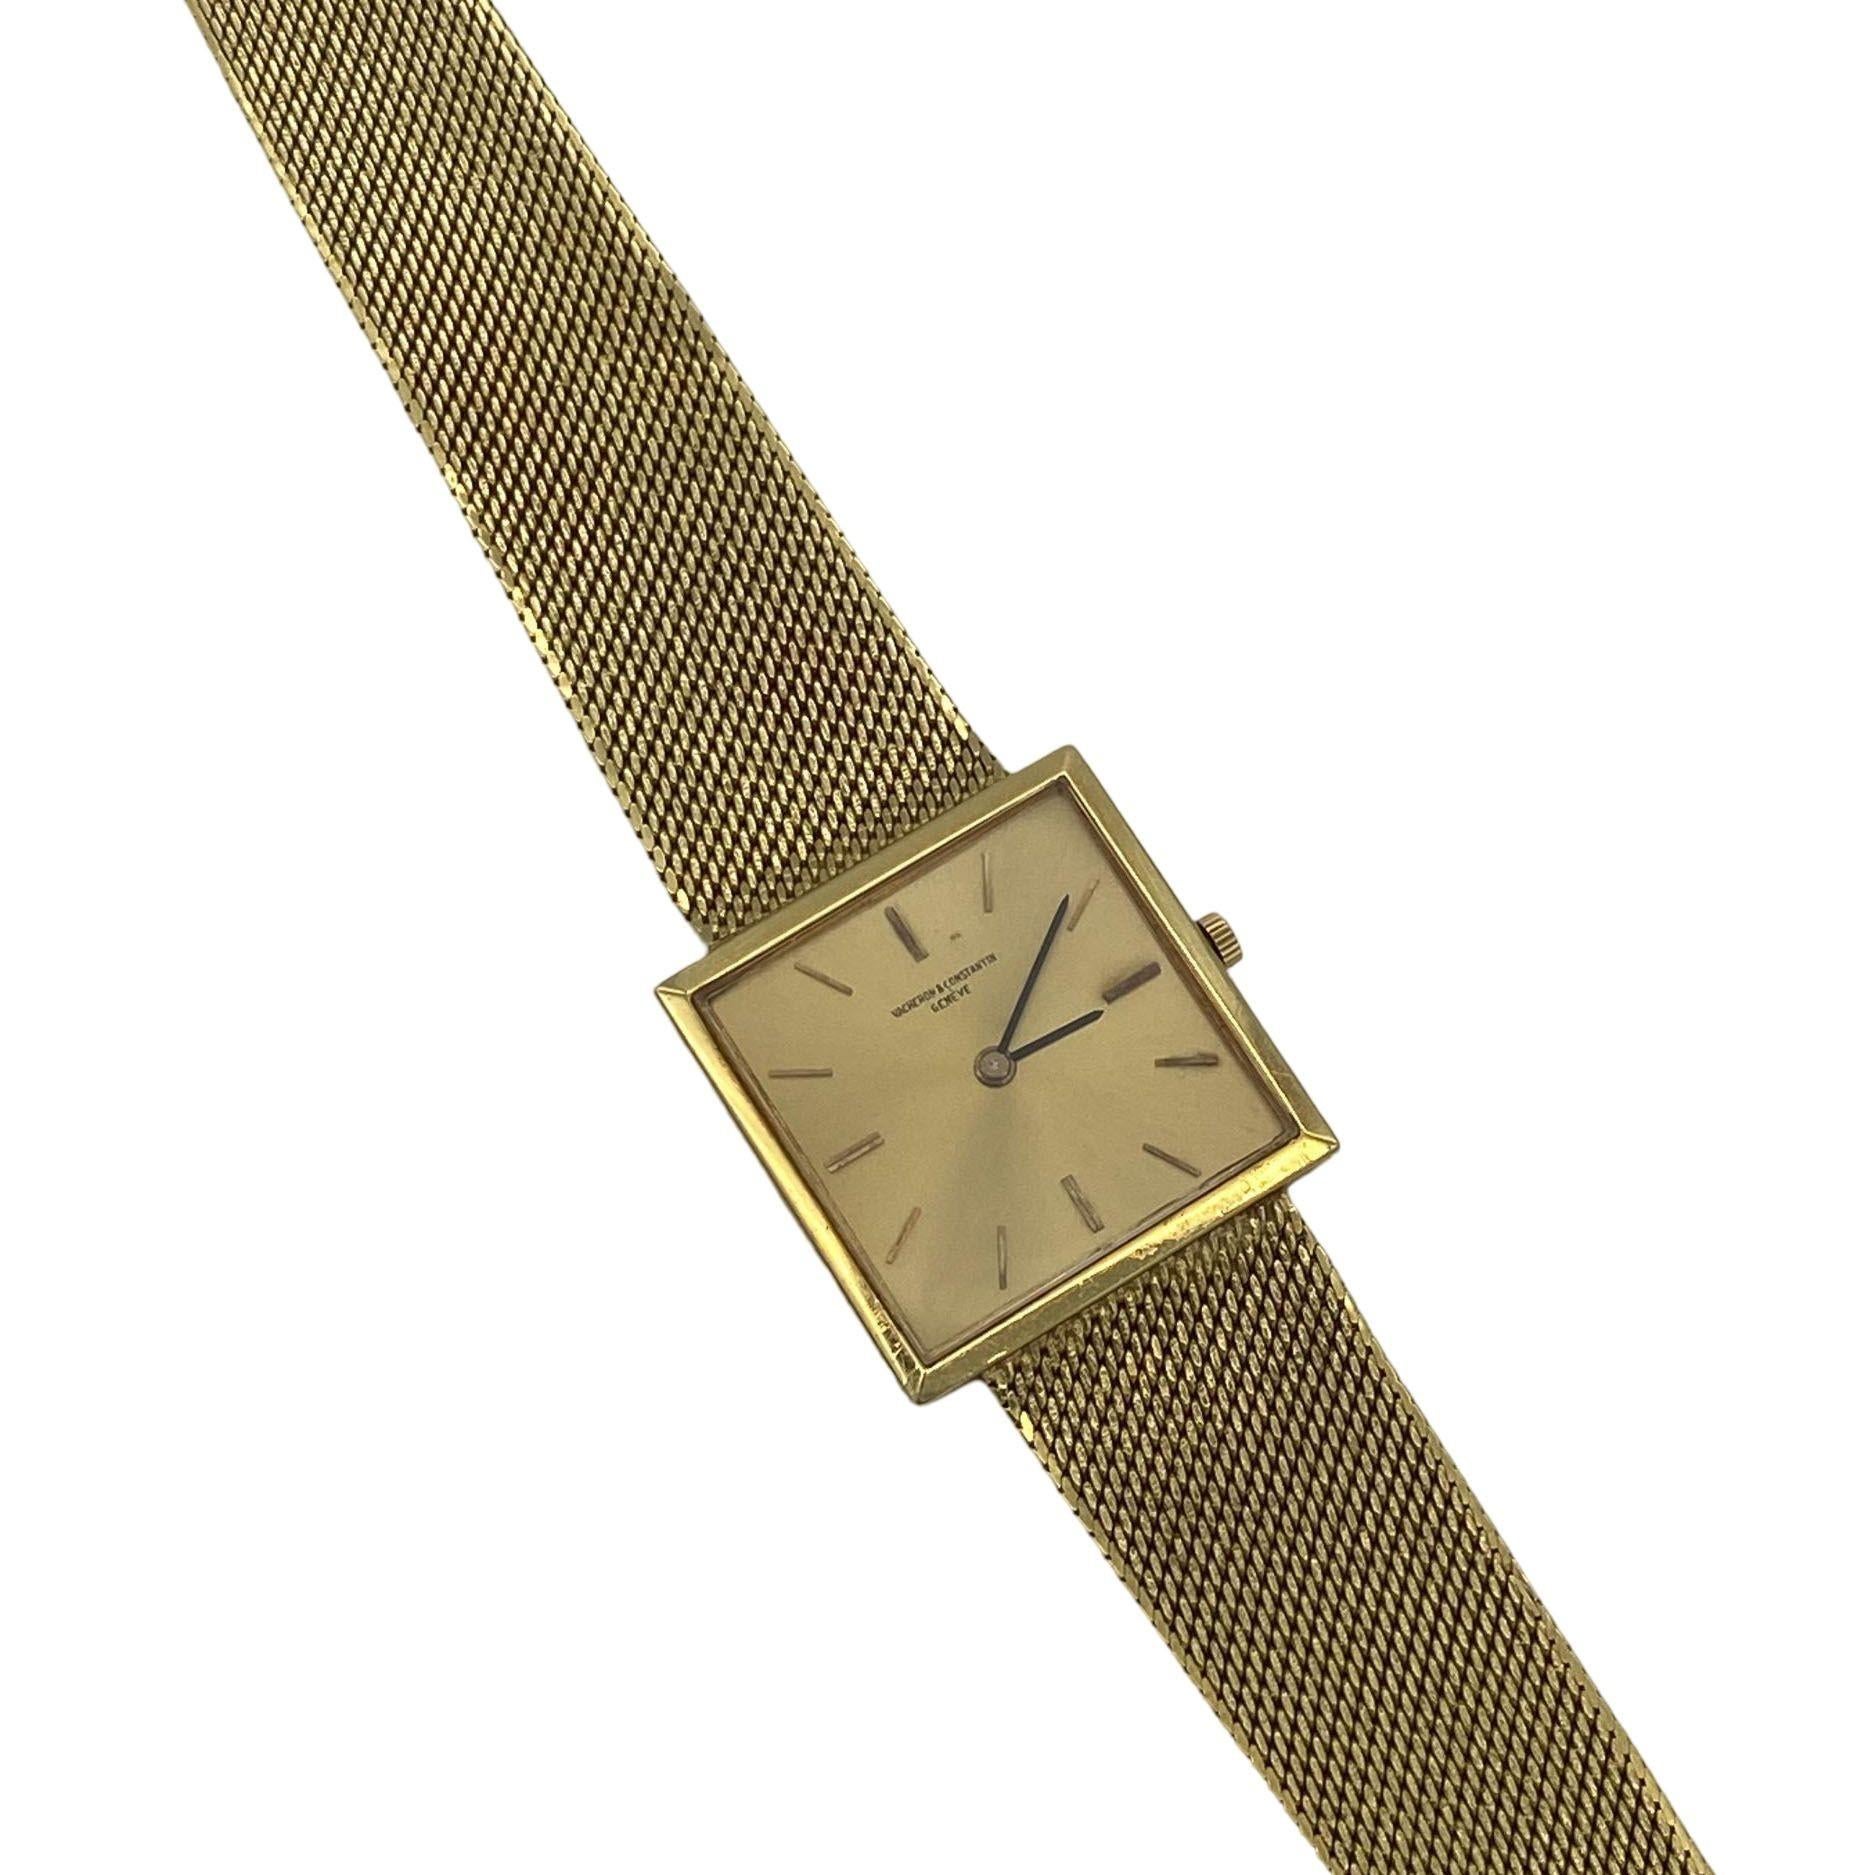 Original mid-century 1950 Vacheron Constantin Square in solid 18K 0.750 gold watch with 18k gold wrist band.

SIGNED 